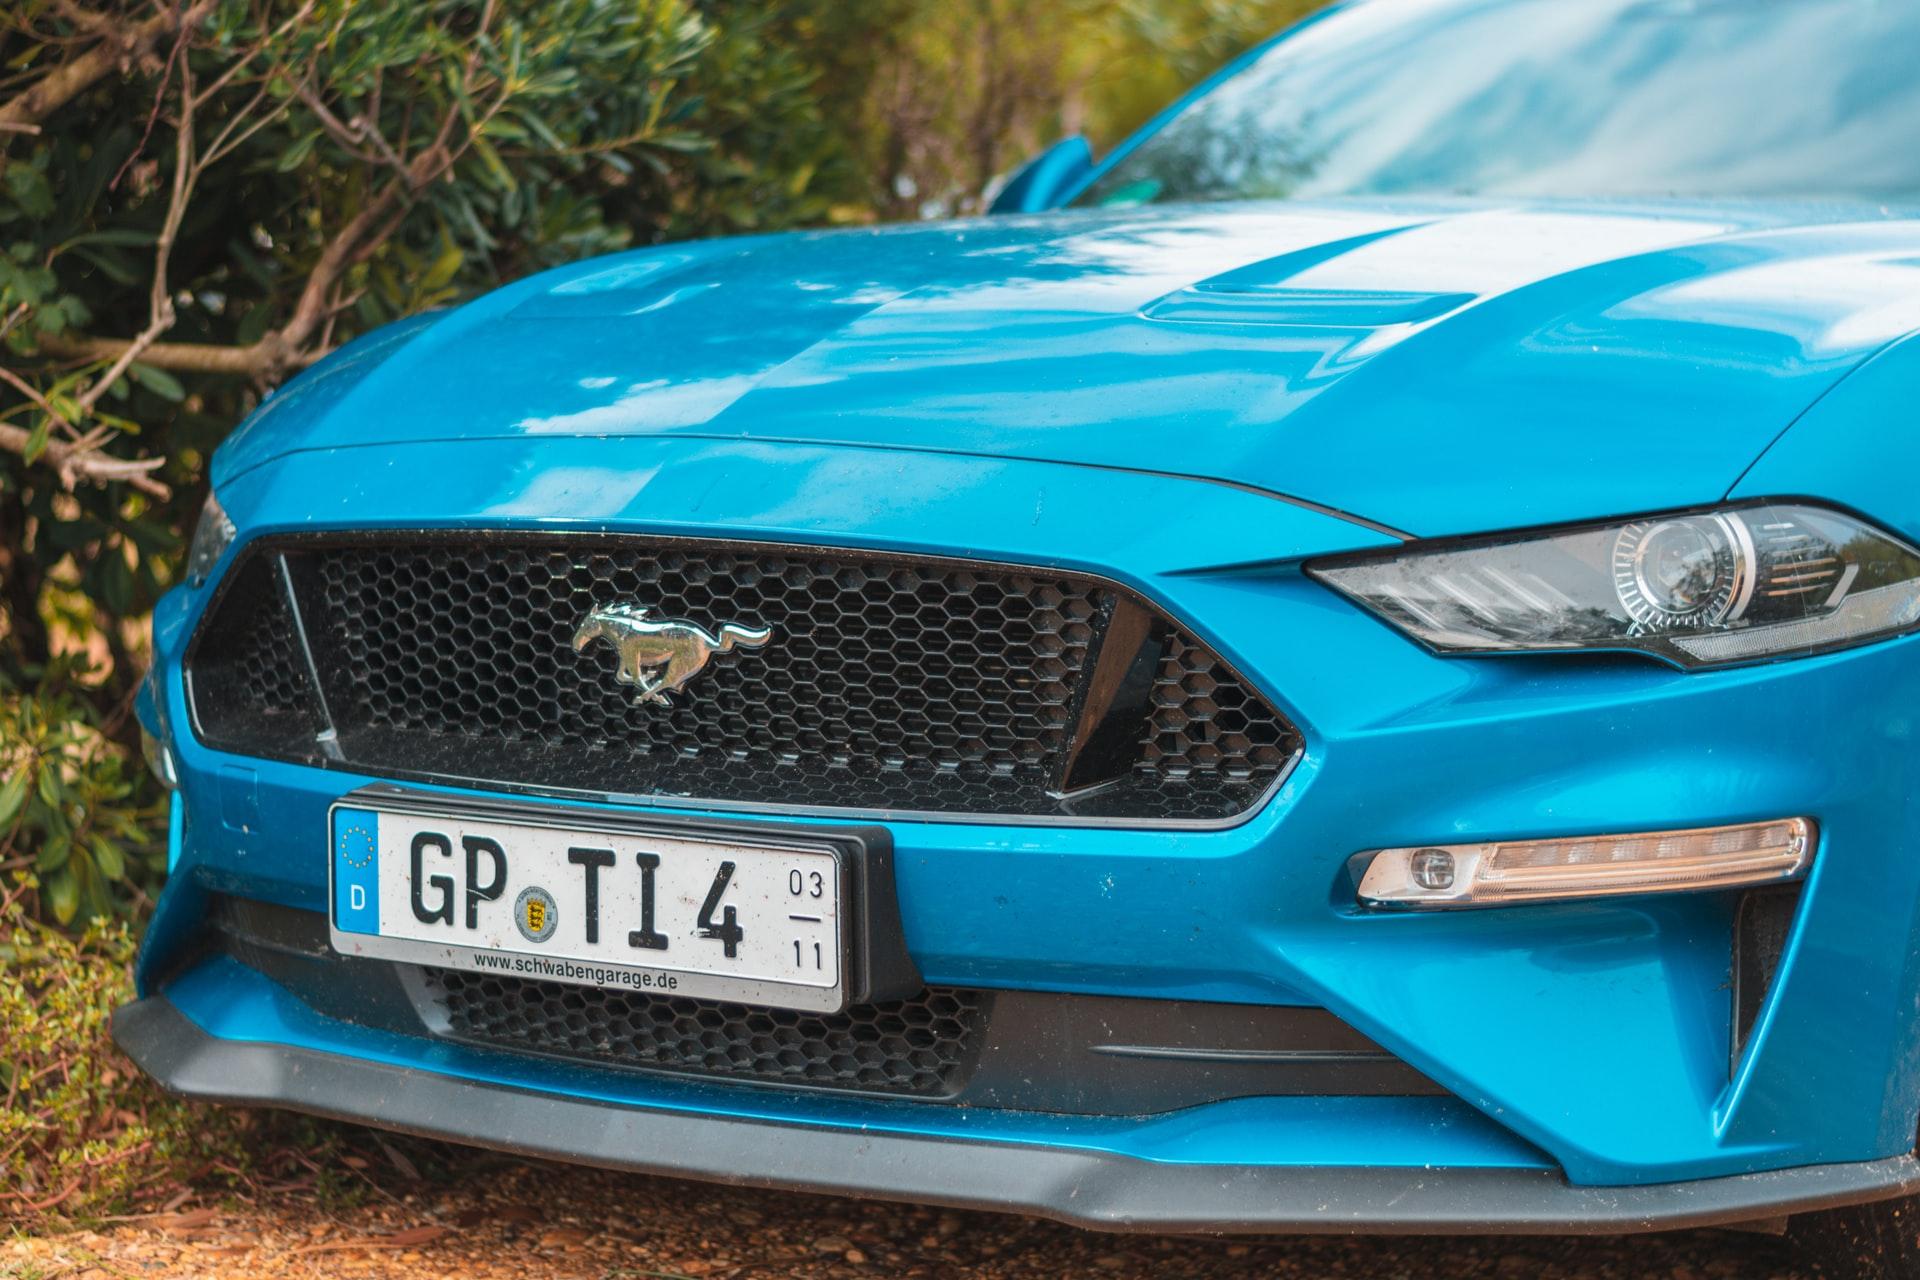 Blue paint makes a regular Mustang look even more like a classic.